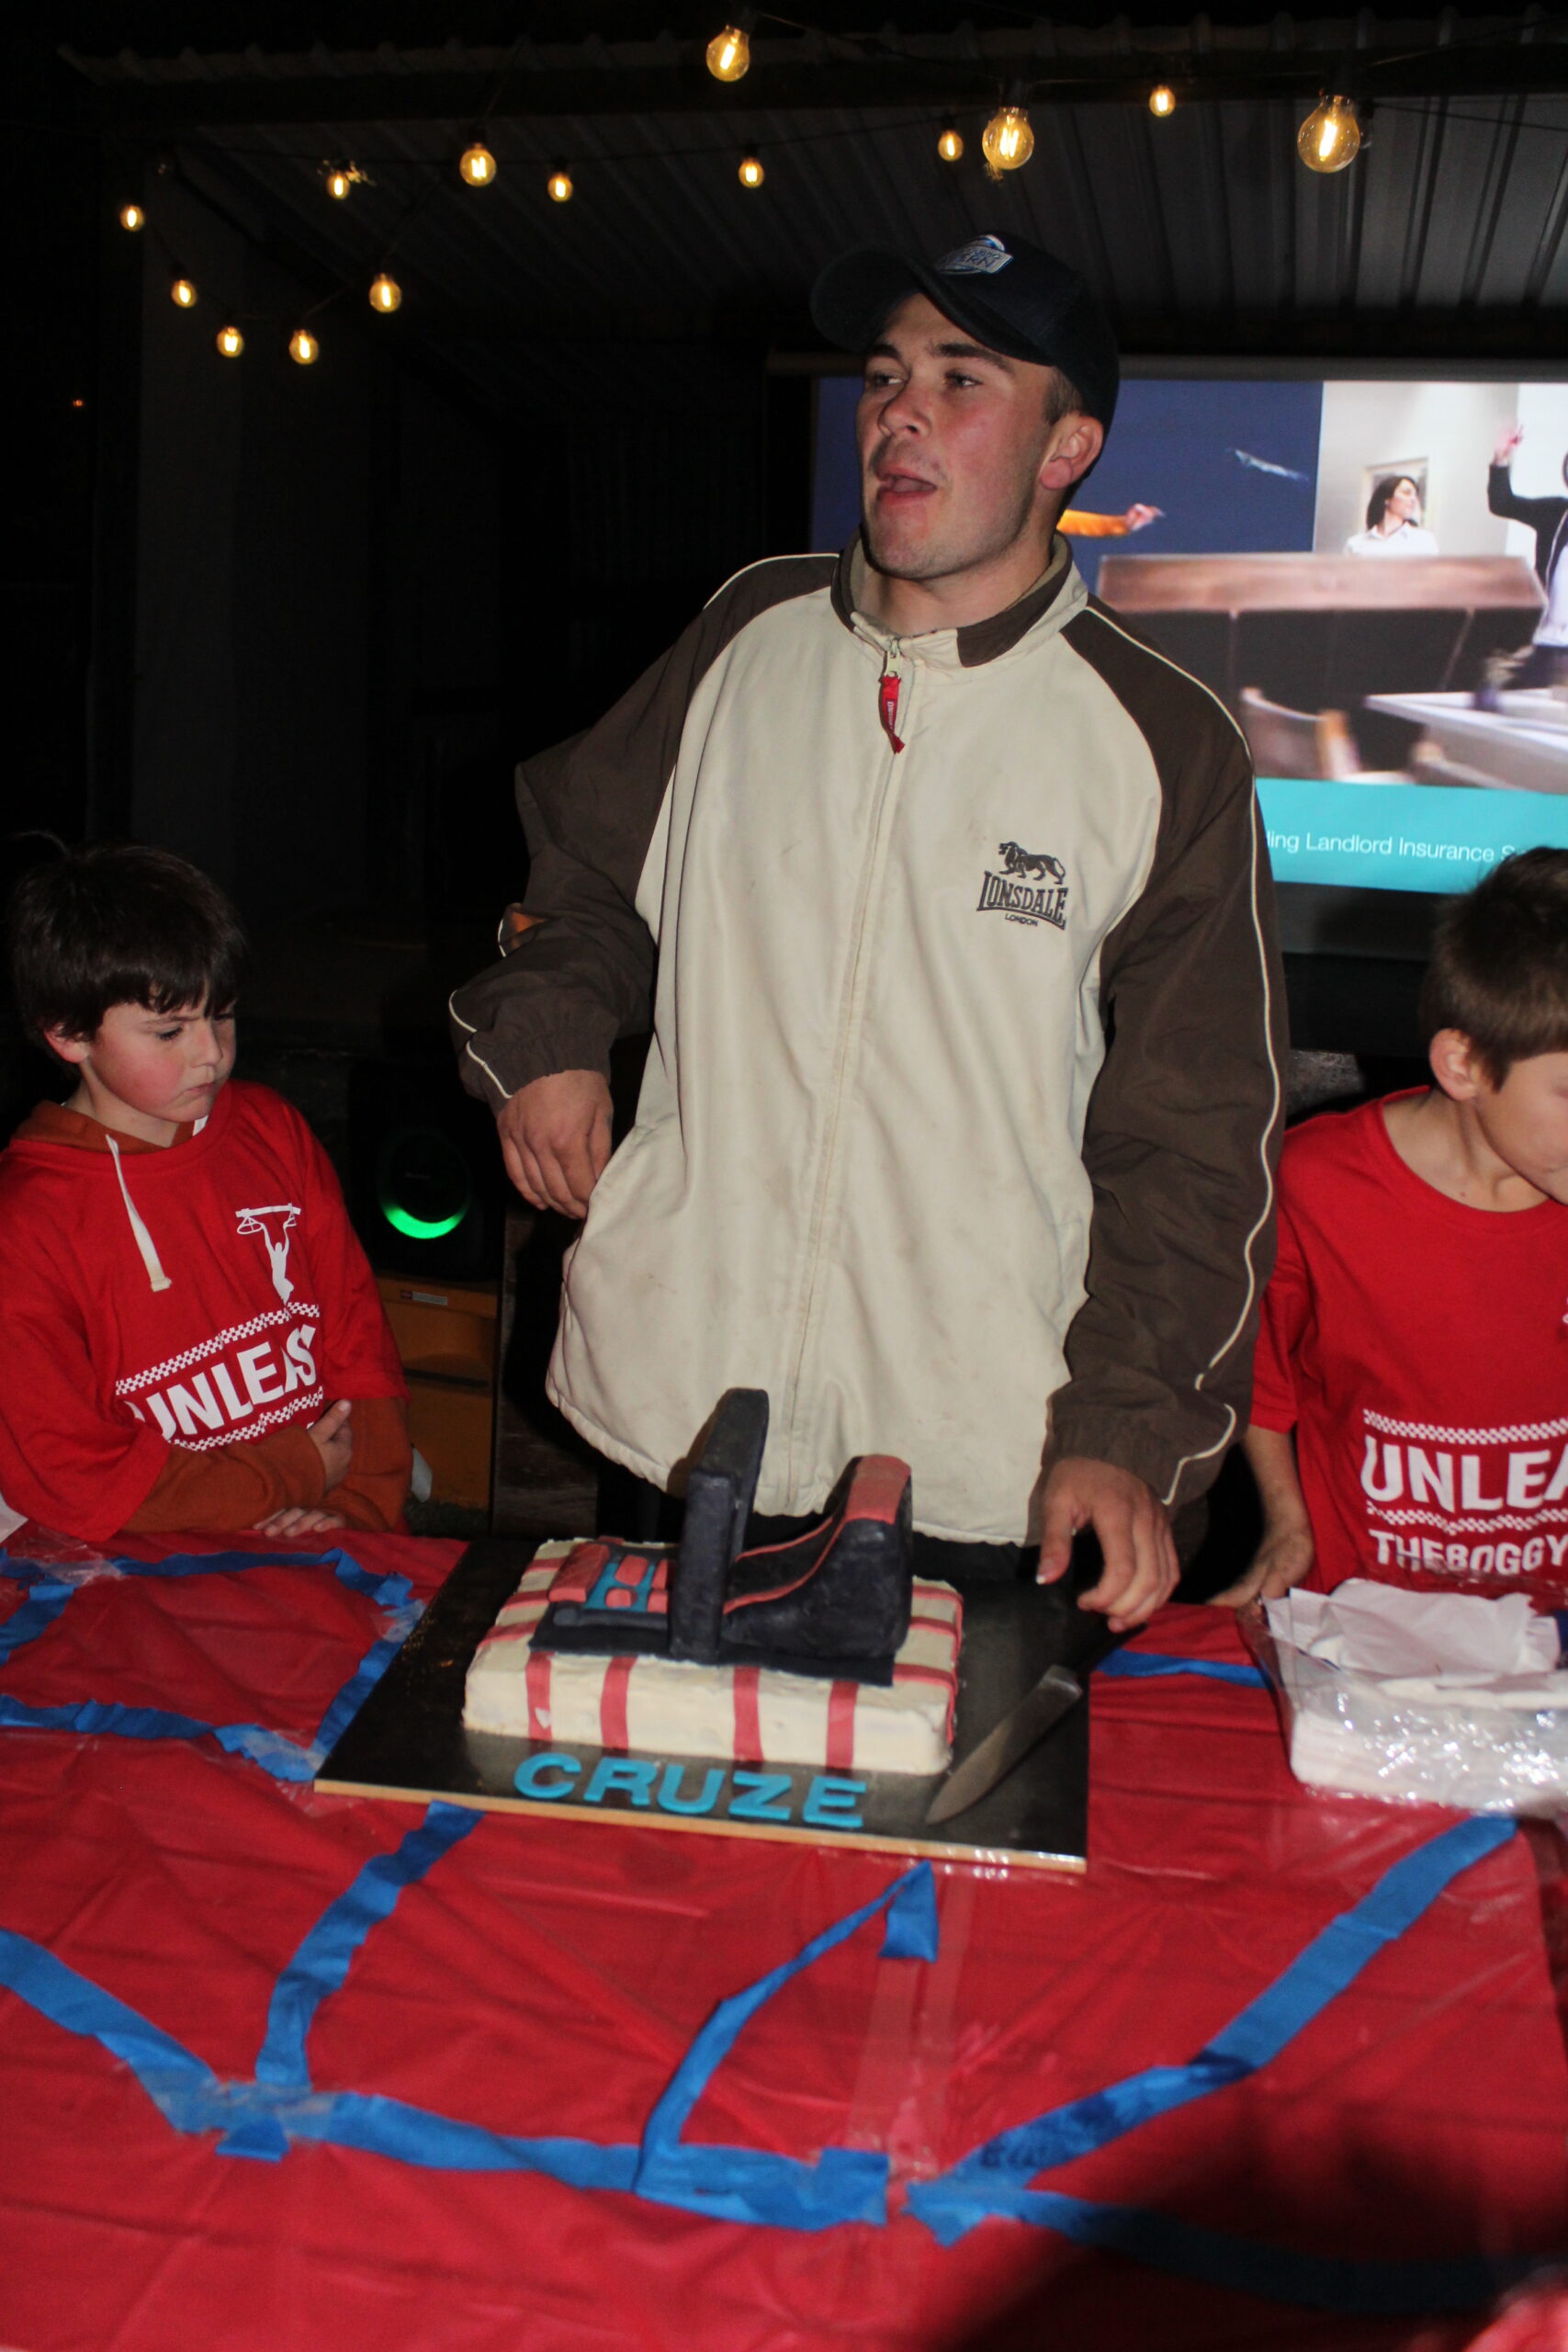 Cruze Morley thanking the crowd and cutting his celebration cake.